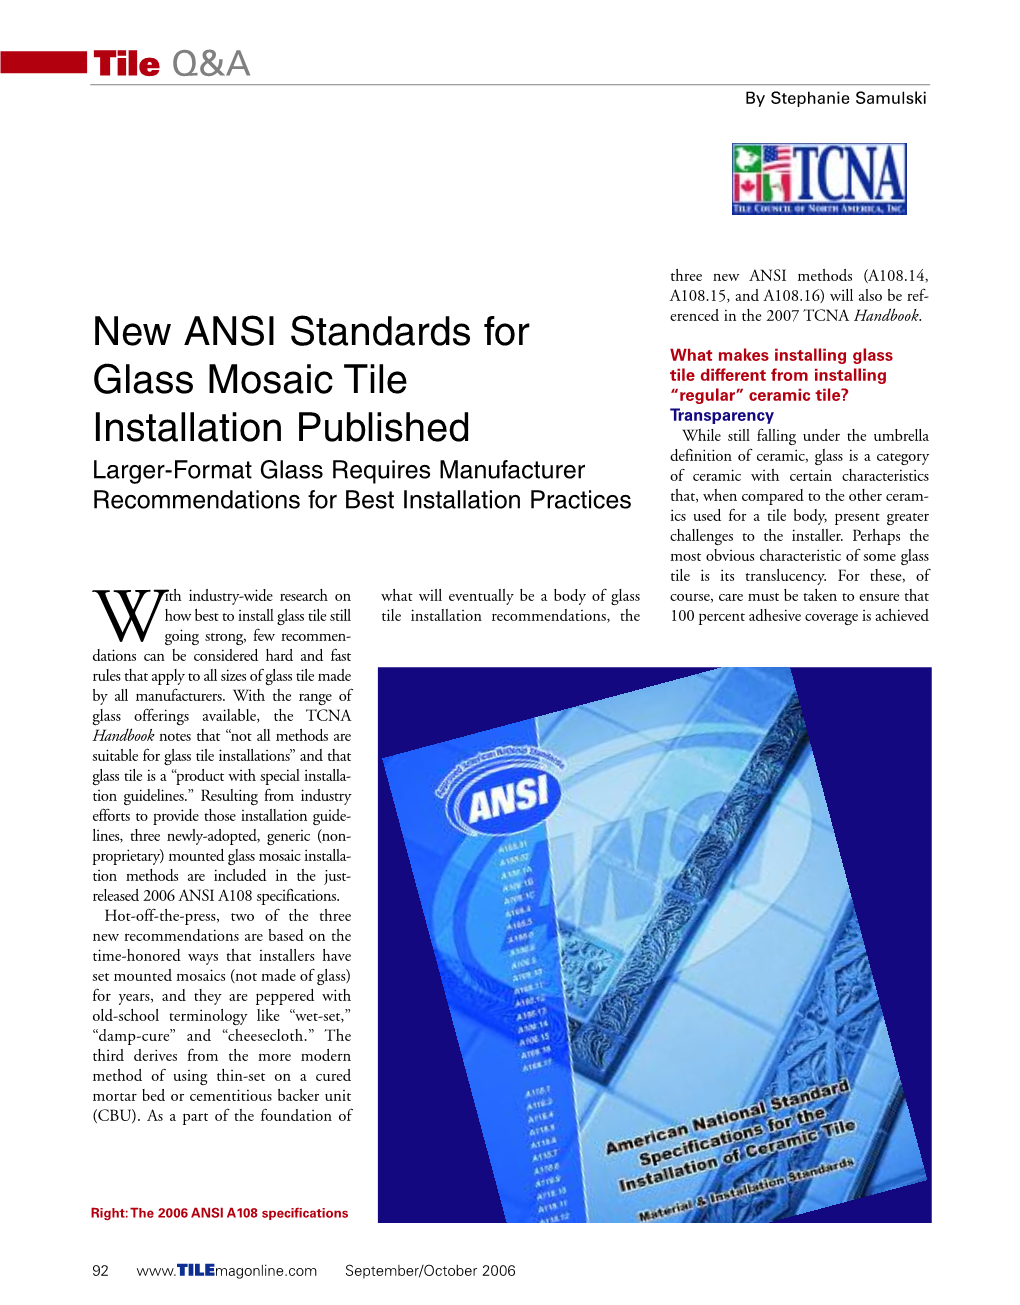 New ANSI Standards for Glass Mosaic